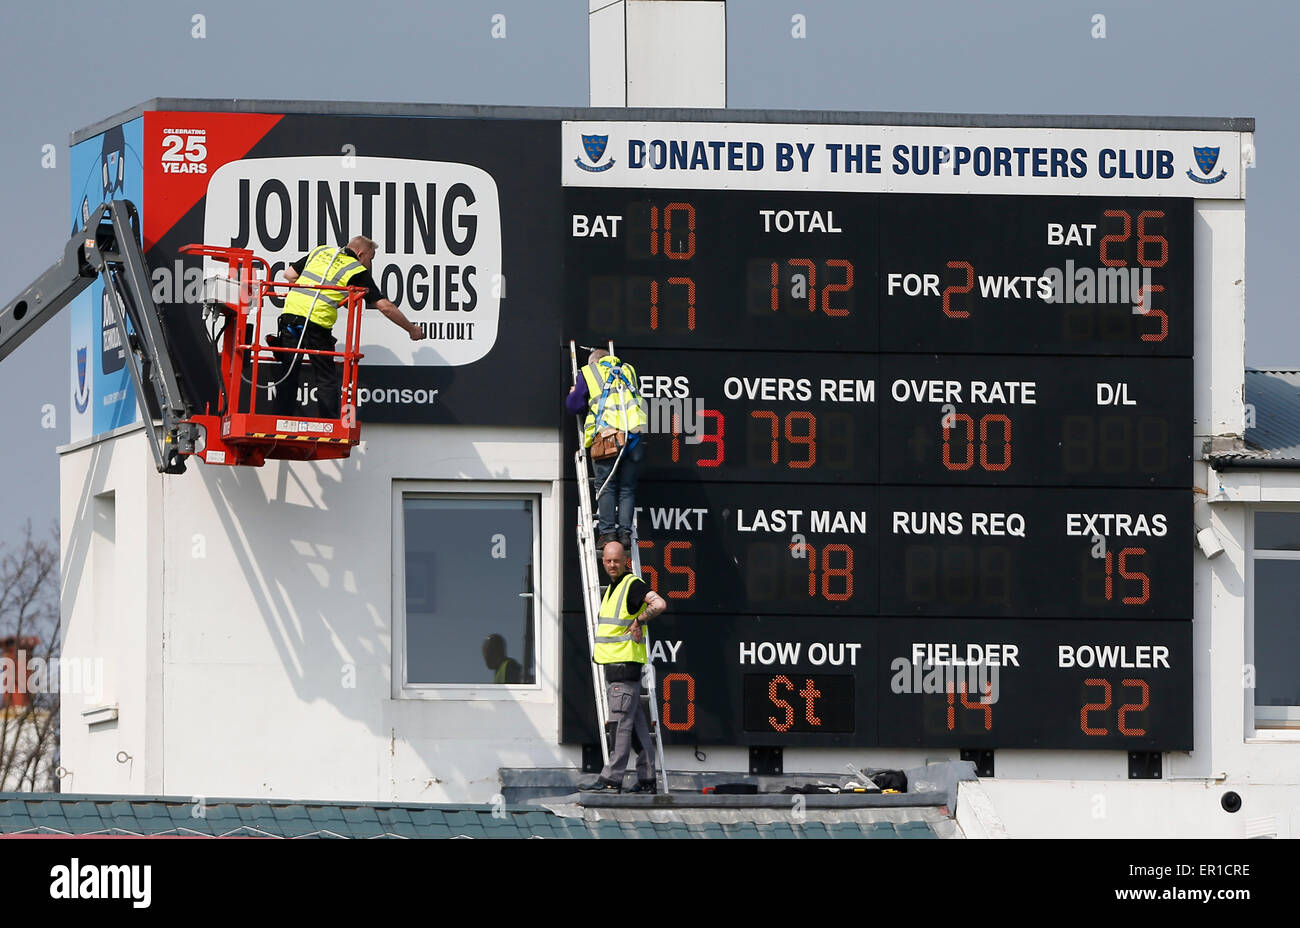 Workmen get a birds eye view of the match from the scoreboard during a pre season friendly match between Sussex and Surrey at the Brightonandhovejobs.com County Ground in Hove. April 8 2015 James Boardman / TELEPHOTO IMAGES 07967642437 Stock Photo